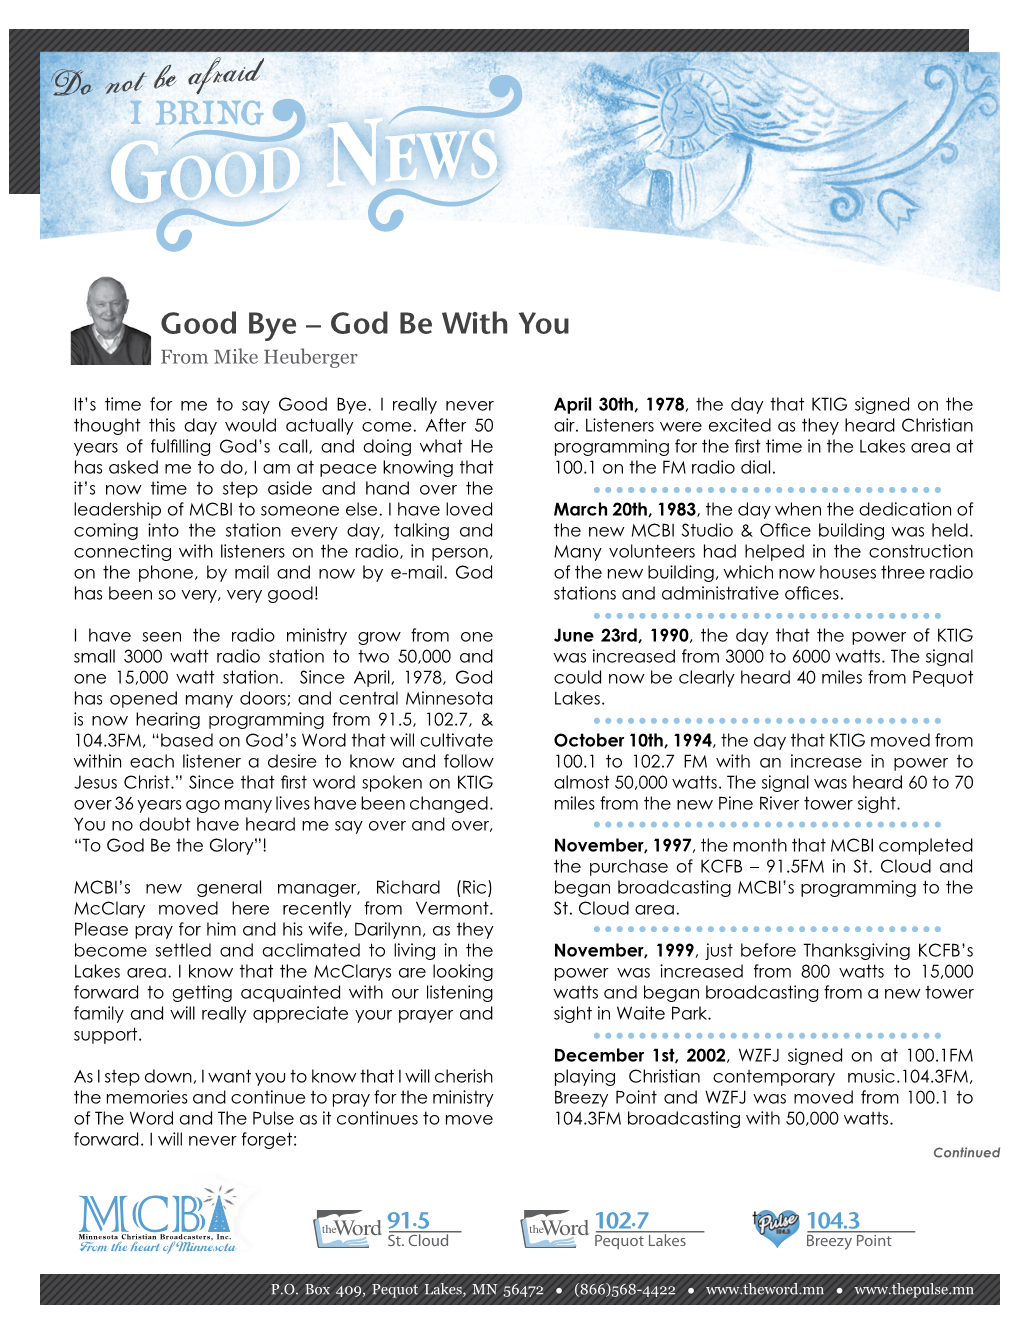 God Be with You from Mike Heuberger